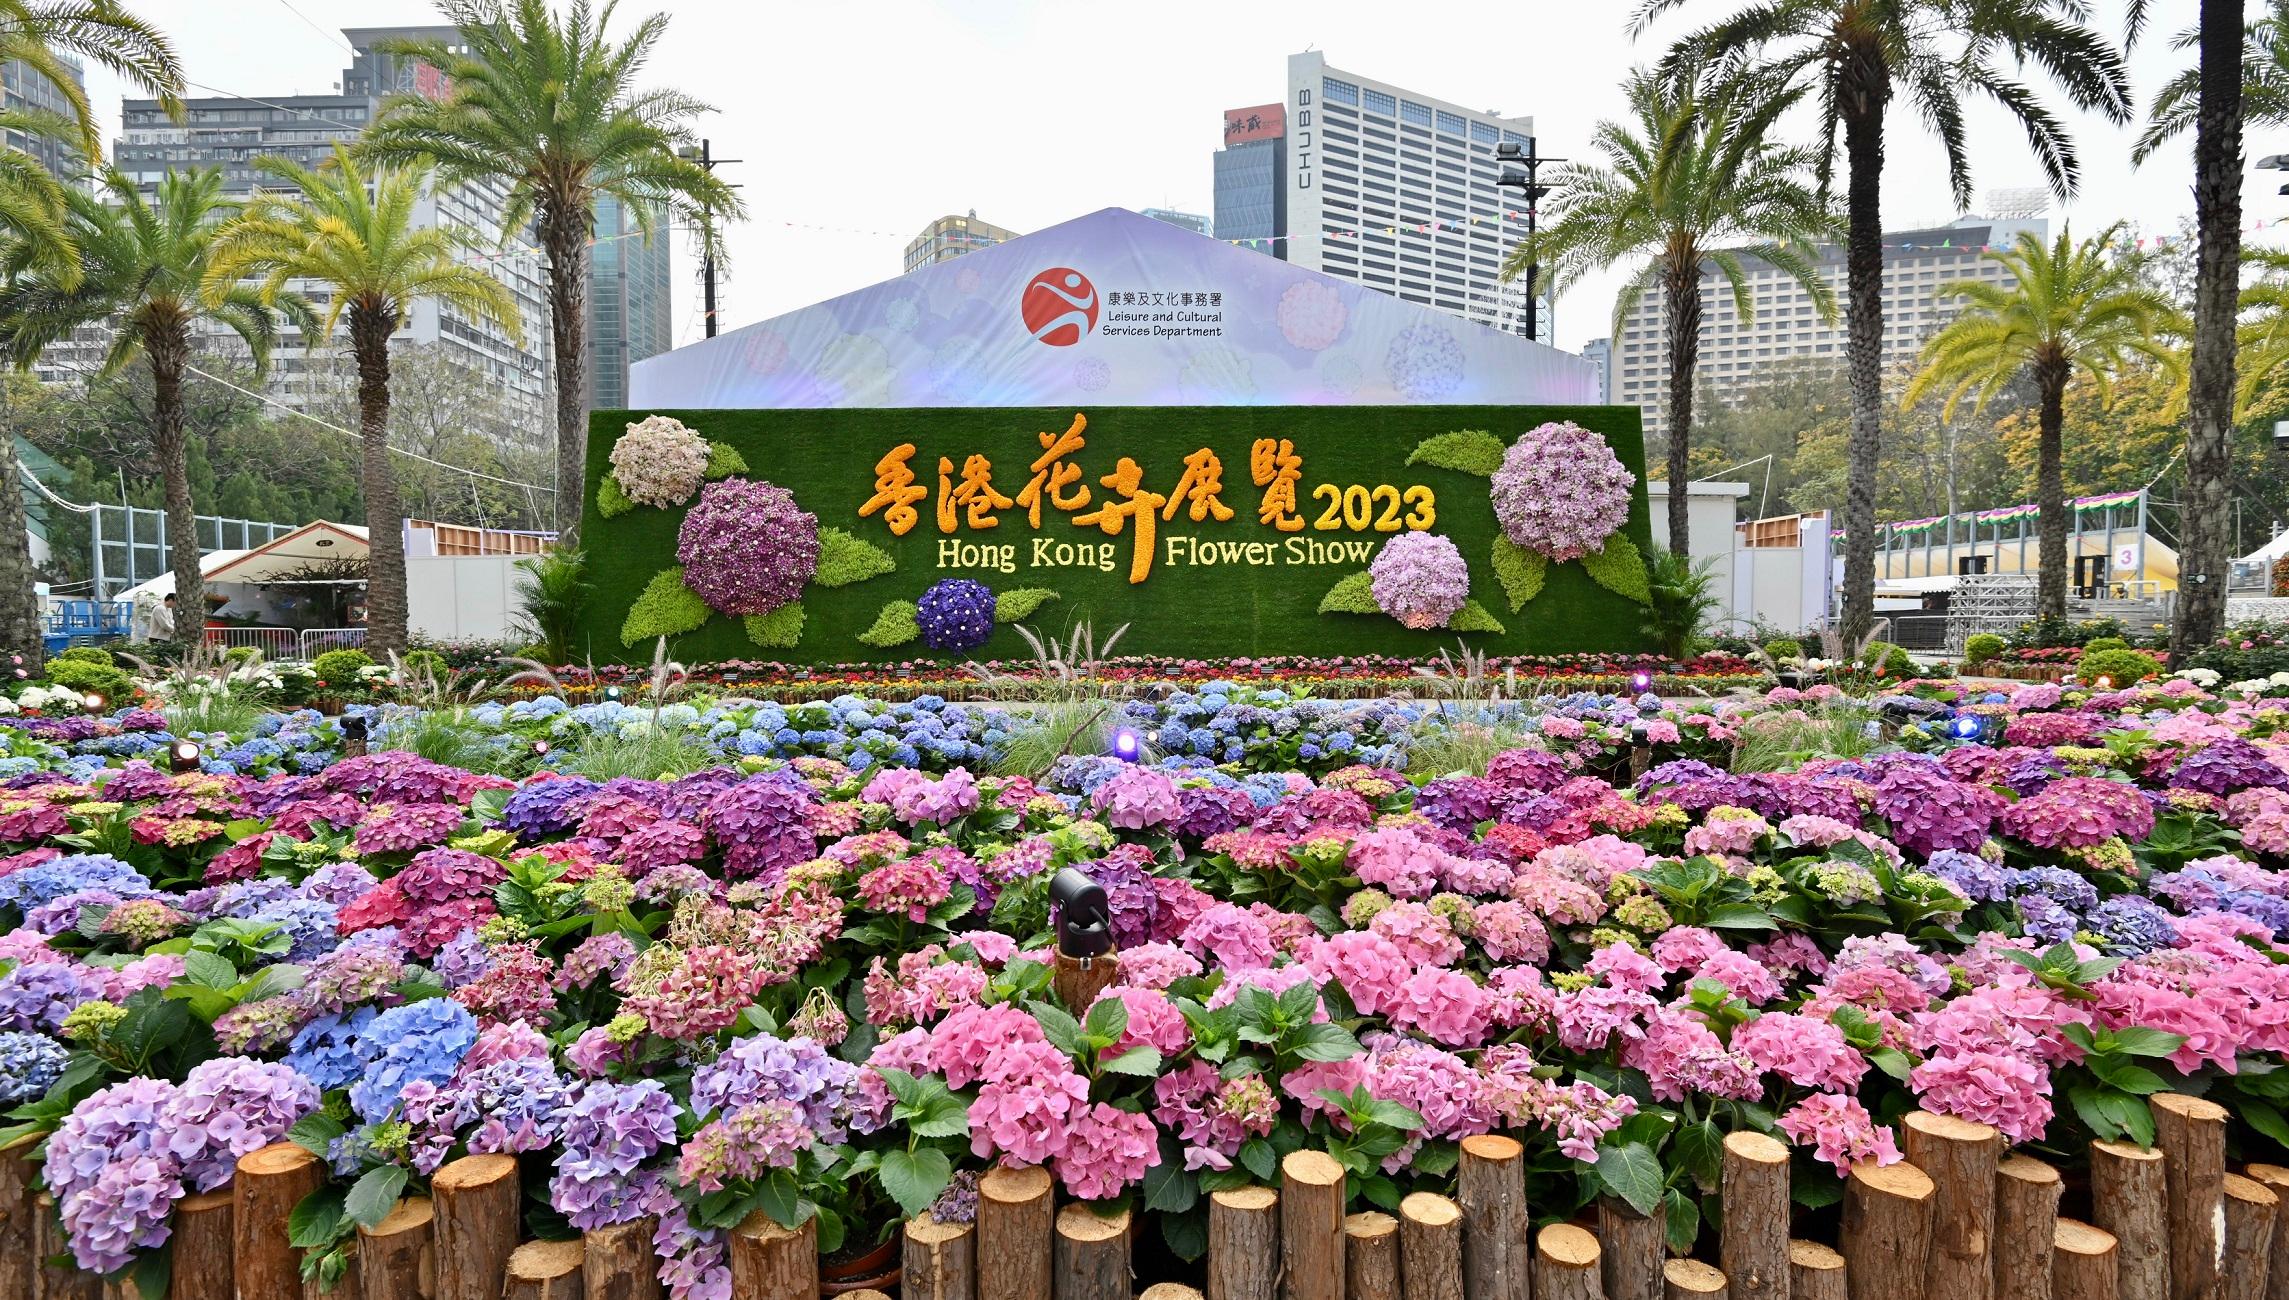 The Hong Kong Flower Show 2023 will be held at Victoria Park from tomorrow (March 10) until March 19. This year's flower show features "Bliss in Bloom" as the main theme and hydrangea as the theme flower. Photo shows an eye-catching three-dimensional hydrangea flower wall and garden, which is one of the major attractions of the flower show. The flower wall and garden comprises eight giant hydrangea models, showcasing the beauty of hydrangeas.